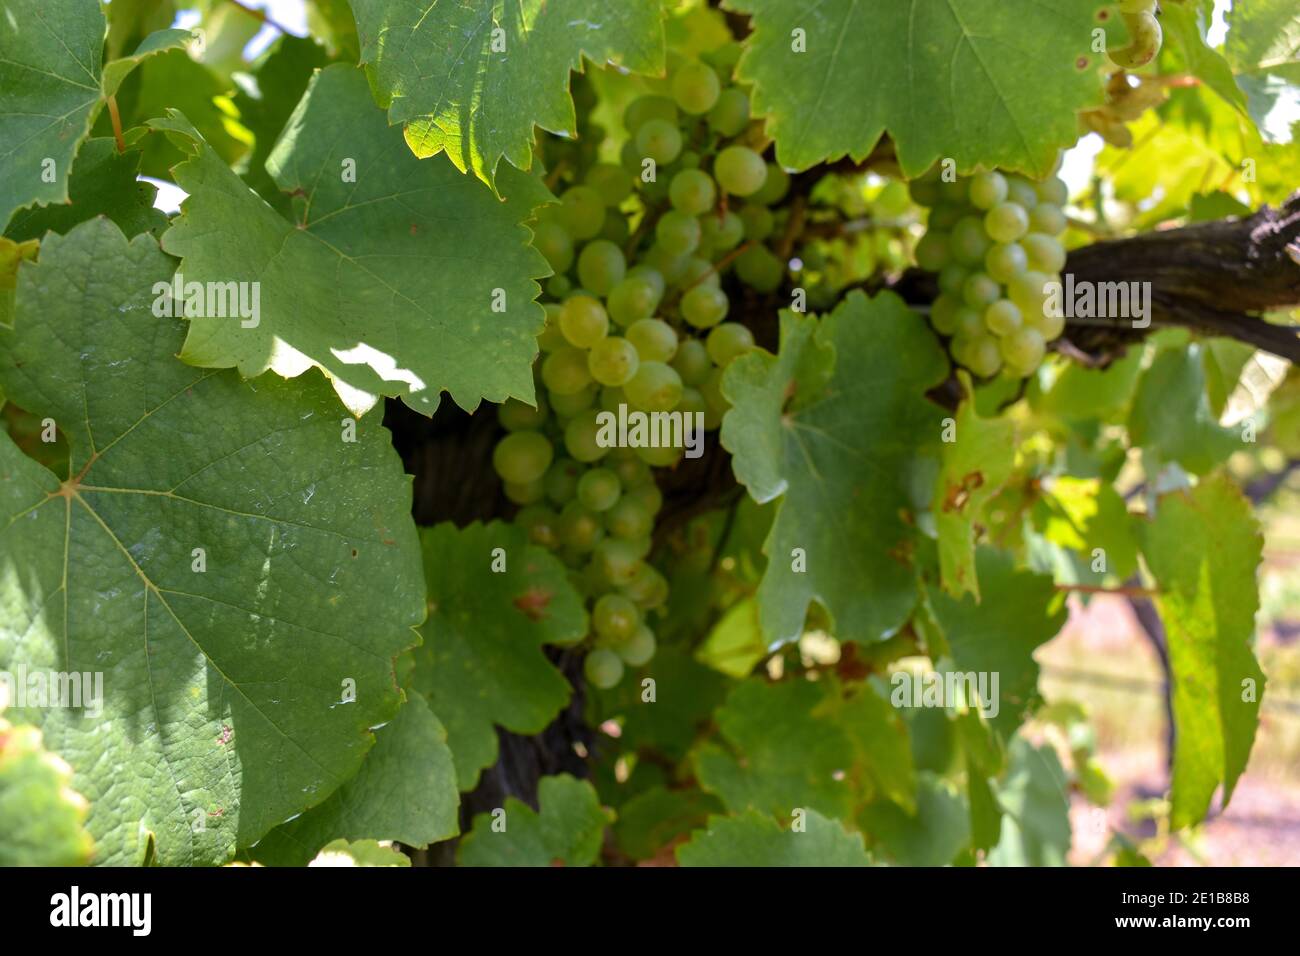 chardonnay grapes on a mature vine with branches in the background Stock Photo